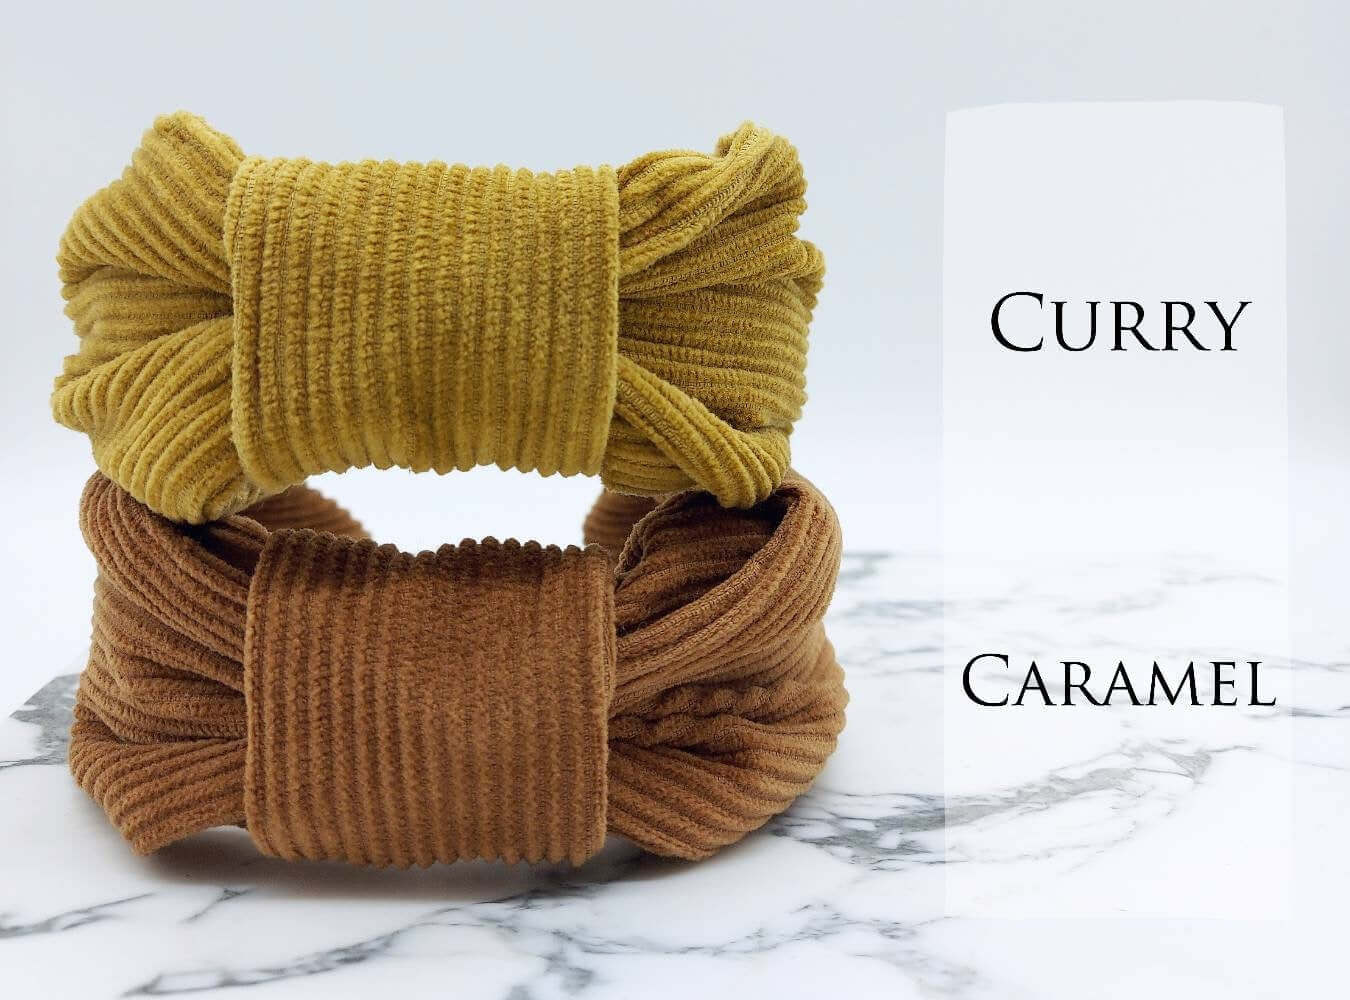 Two, luxury bow-style, corduroy fabric knot headbands in mustard and light brown.